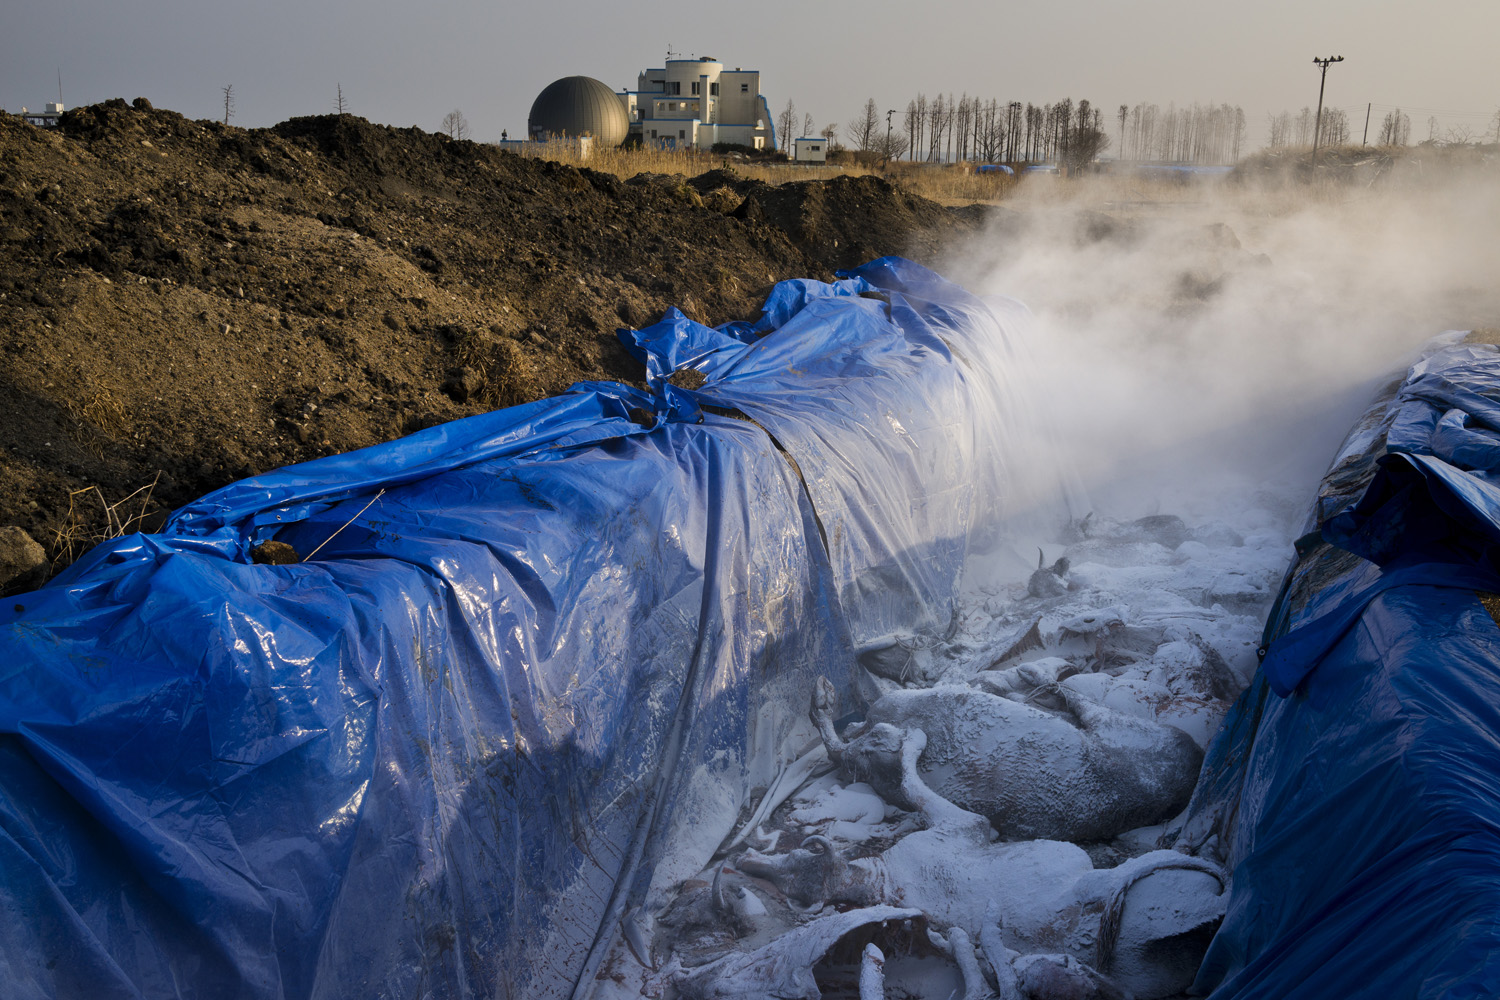 Japan, Namie, 2014A dozen cow remains are dumped into a large pit along side almost two thousand cow carcasses inside the 20km exclusion zone only a few kilometres from the stricken nuclear plant.